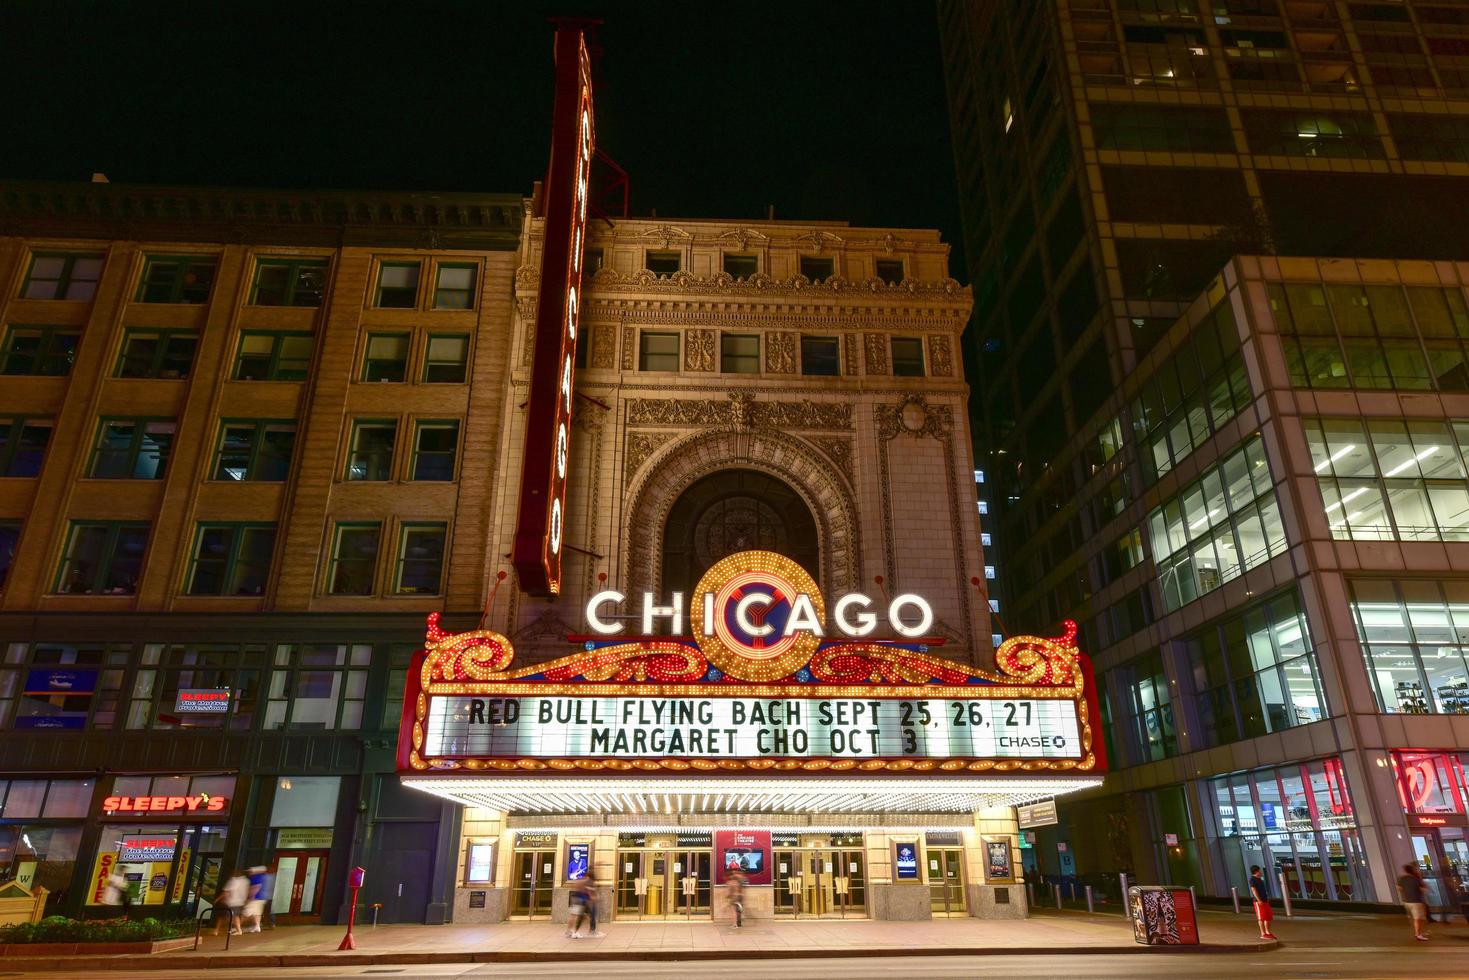 Chicago Theater at night photo